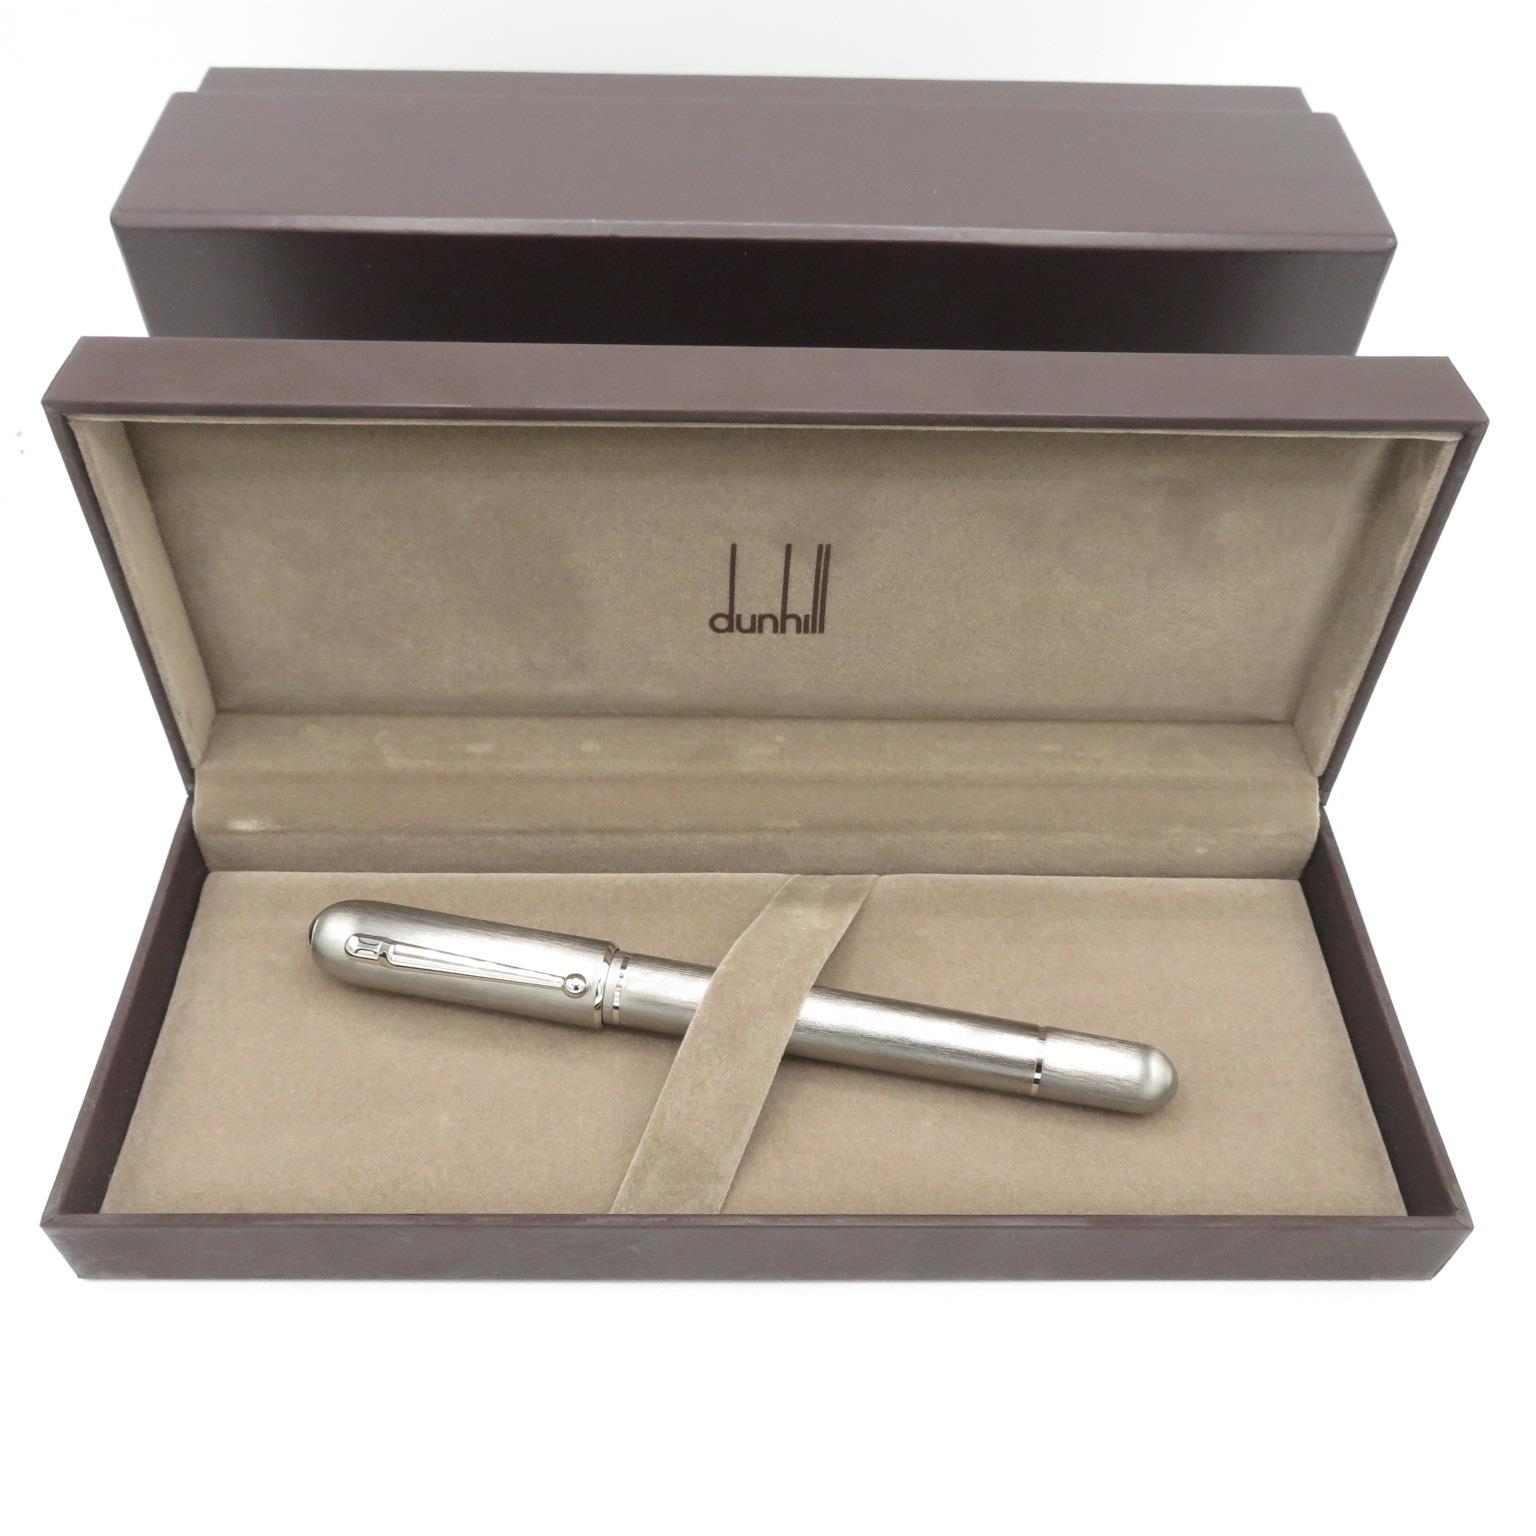 Dunhill Boxed AD2000 Fountain Pen with 18ct white gold nib in as new condition with all paperwork //